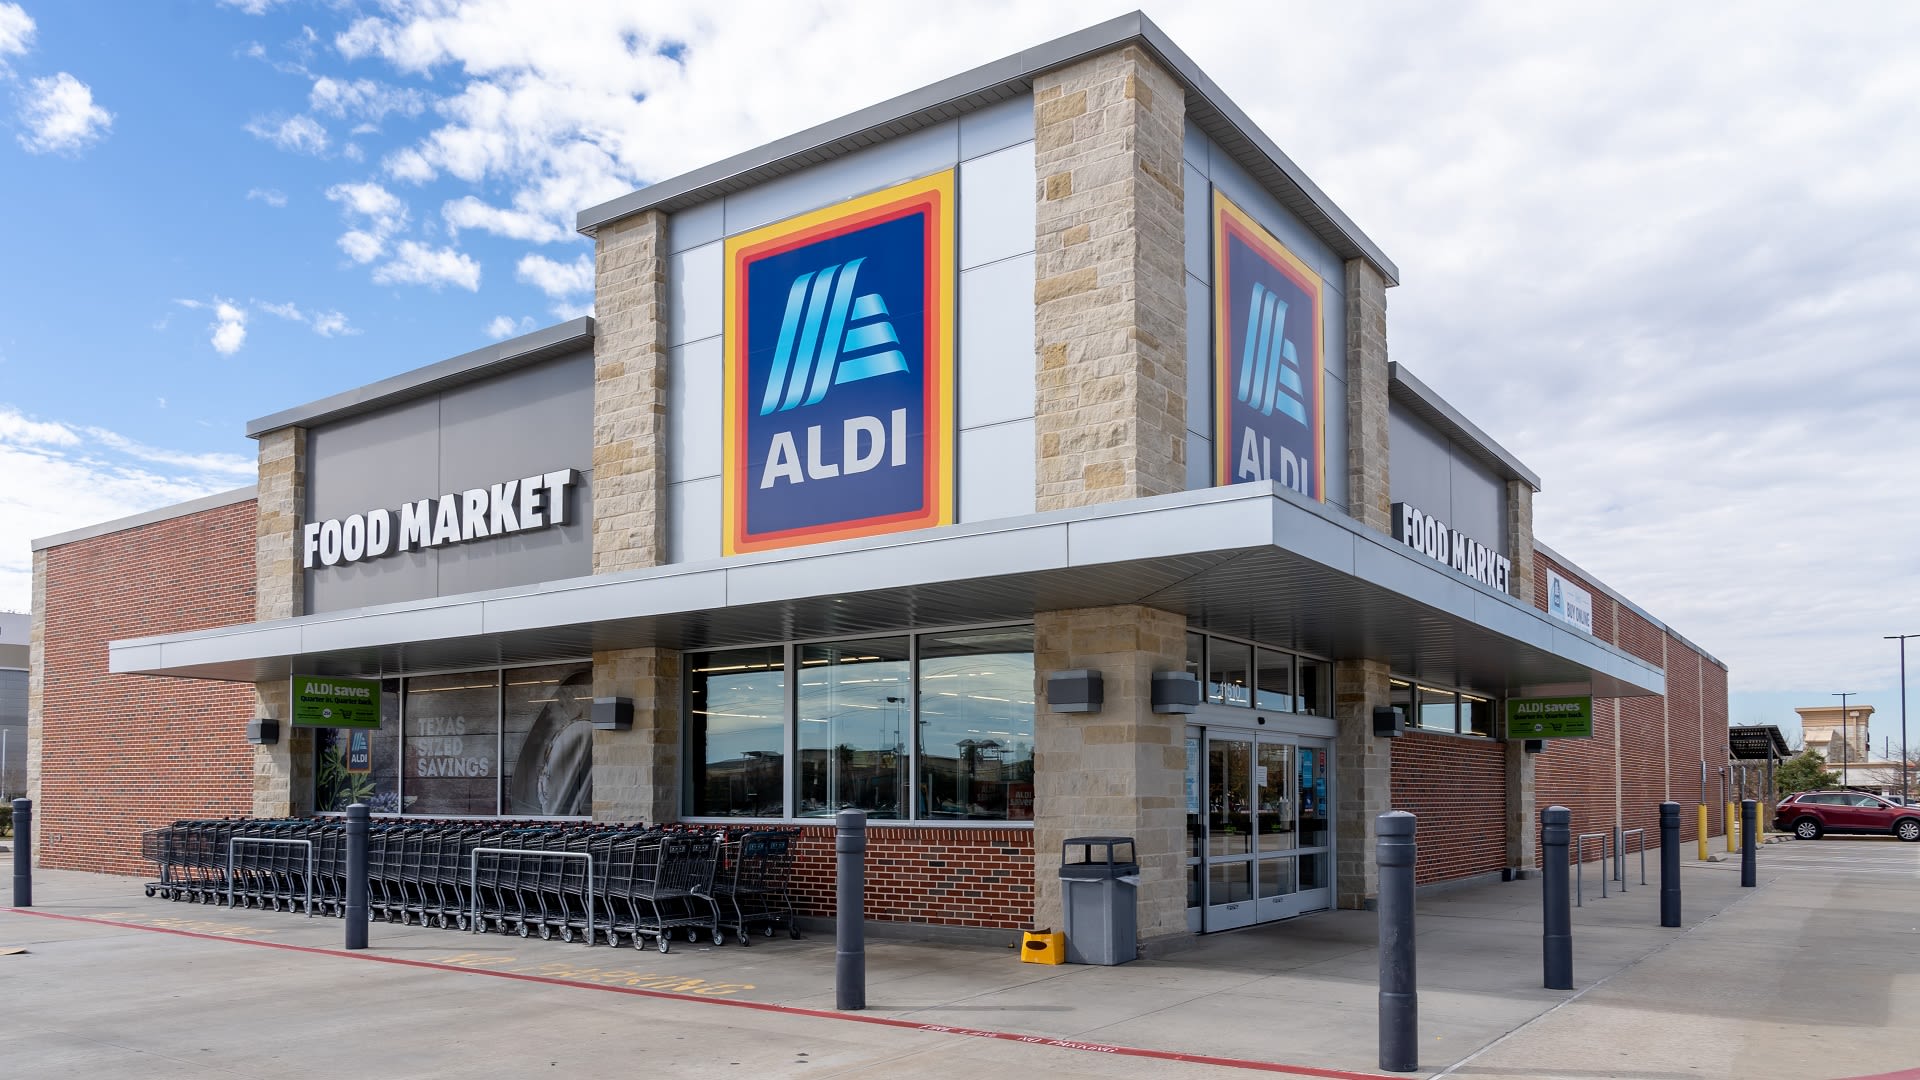 10 Aldi Items That Have the Most Customer Complaints